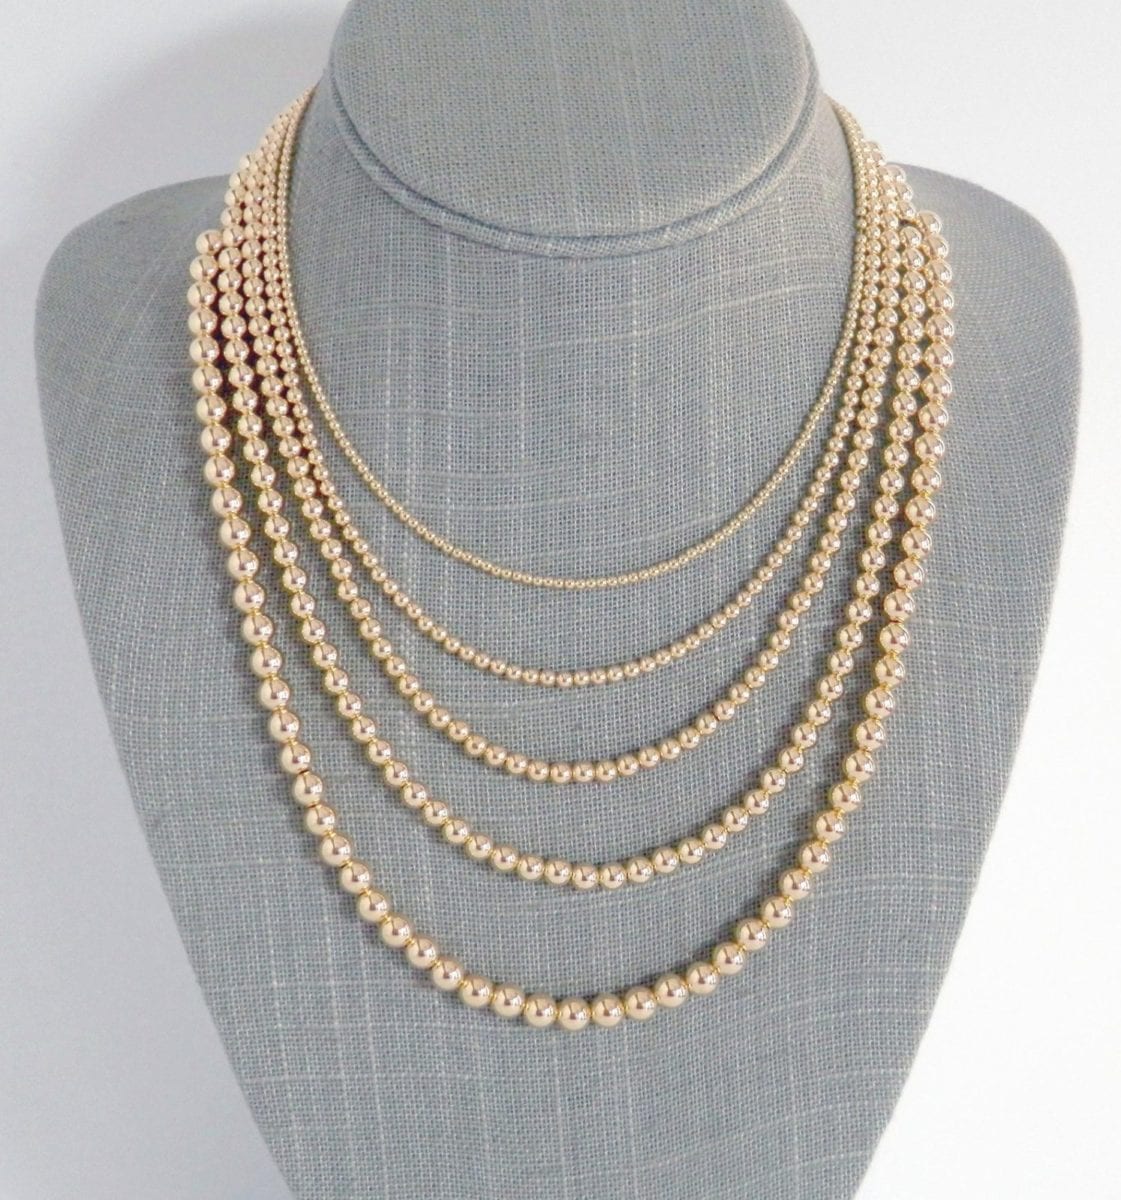 14K Yellow gold filled single strand necklaces